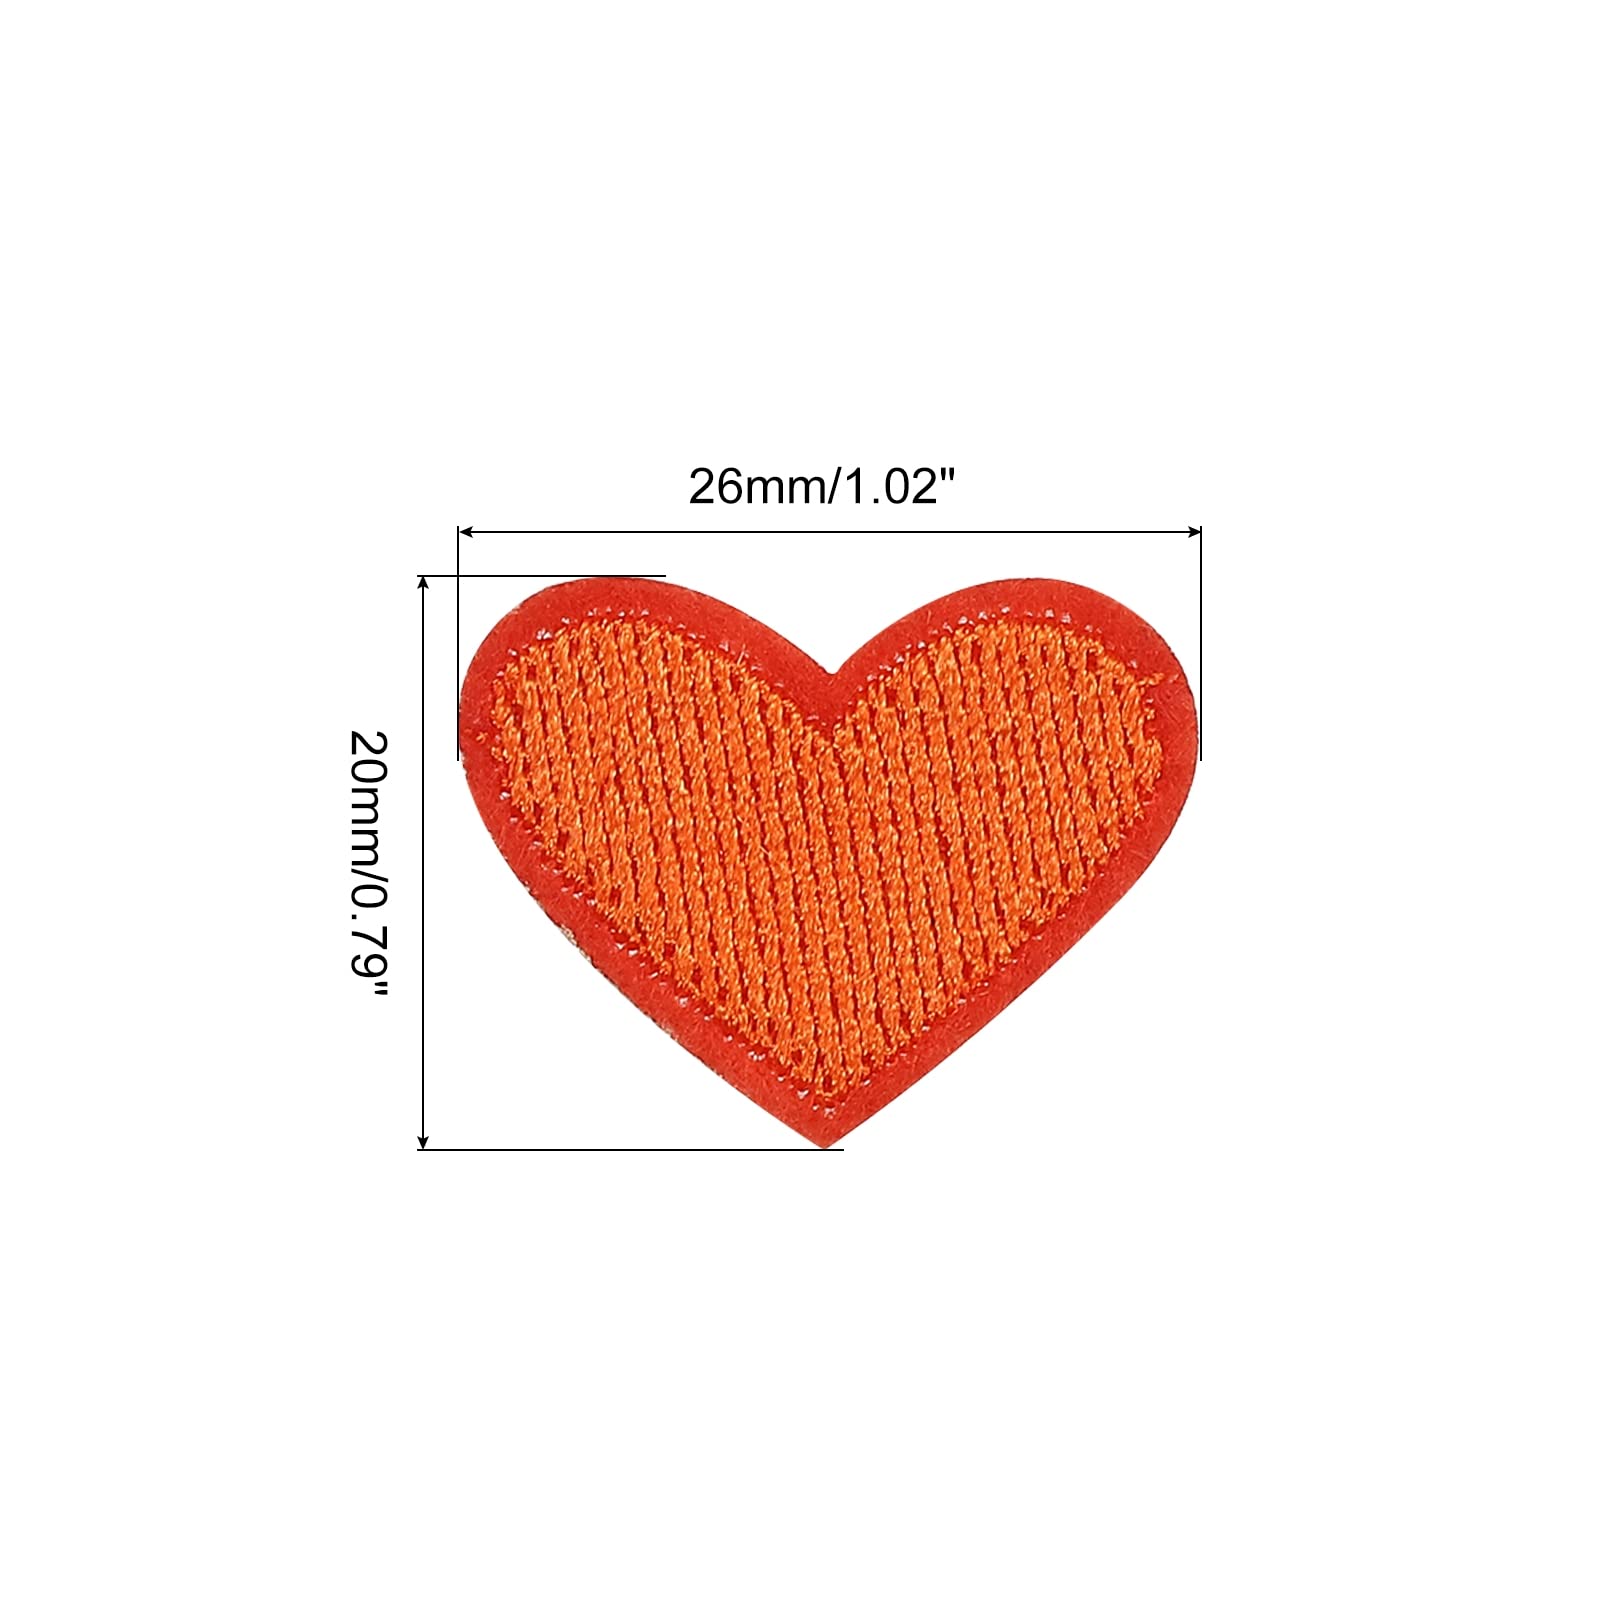 MECCANIXITY Heart Shaped Iron on Patches Orange Embroidered Sew on Love Applique Patches for Clothing Jackets Backpack Shoes Repairing Decorations Pack of 15